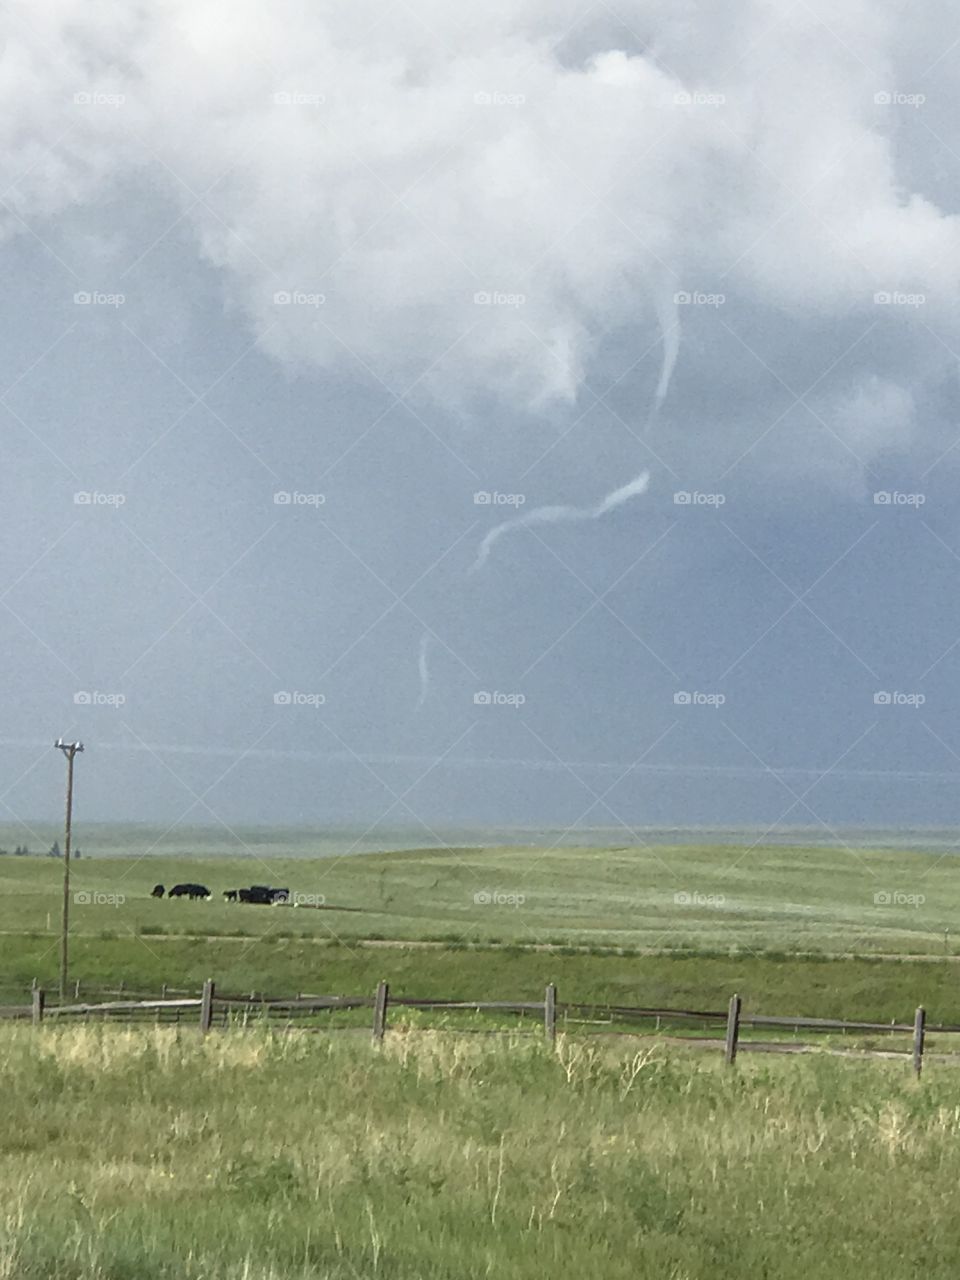 Dying Twister in Wyoming 